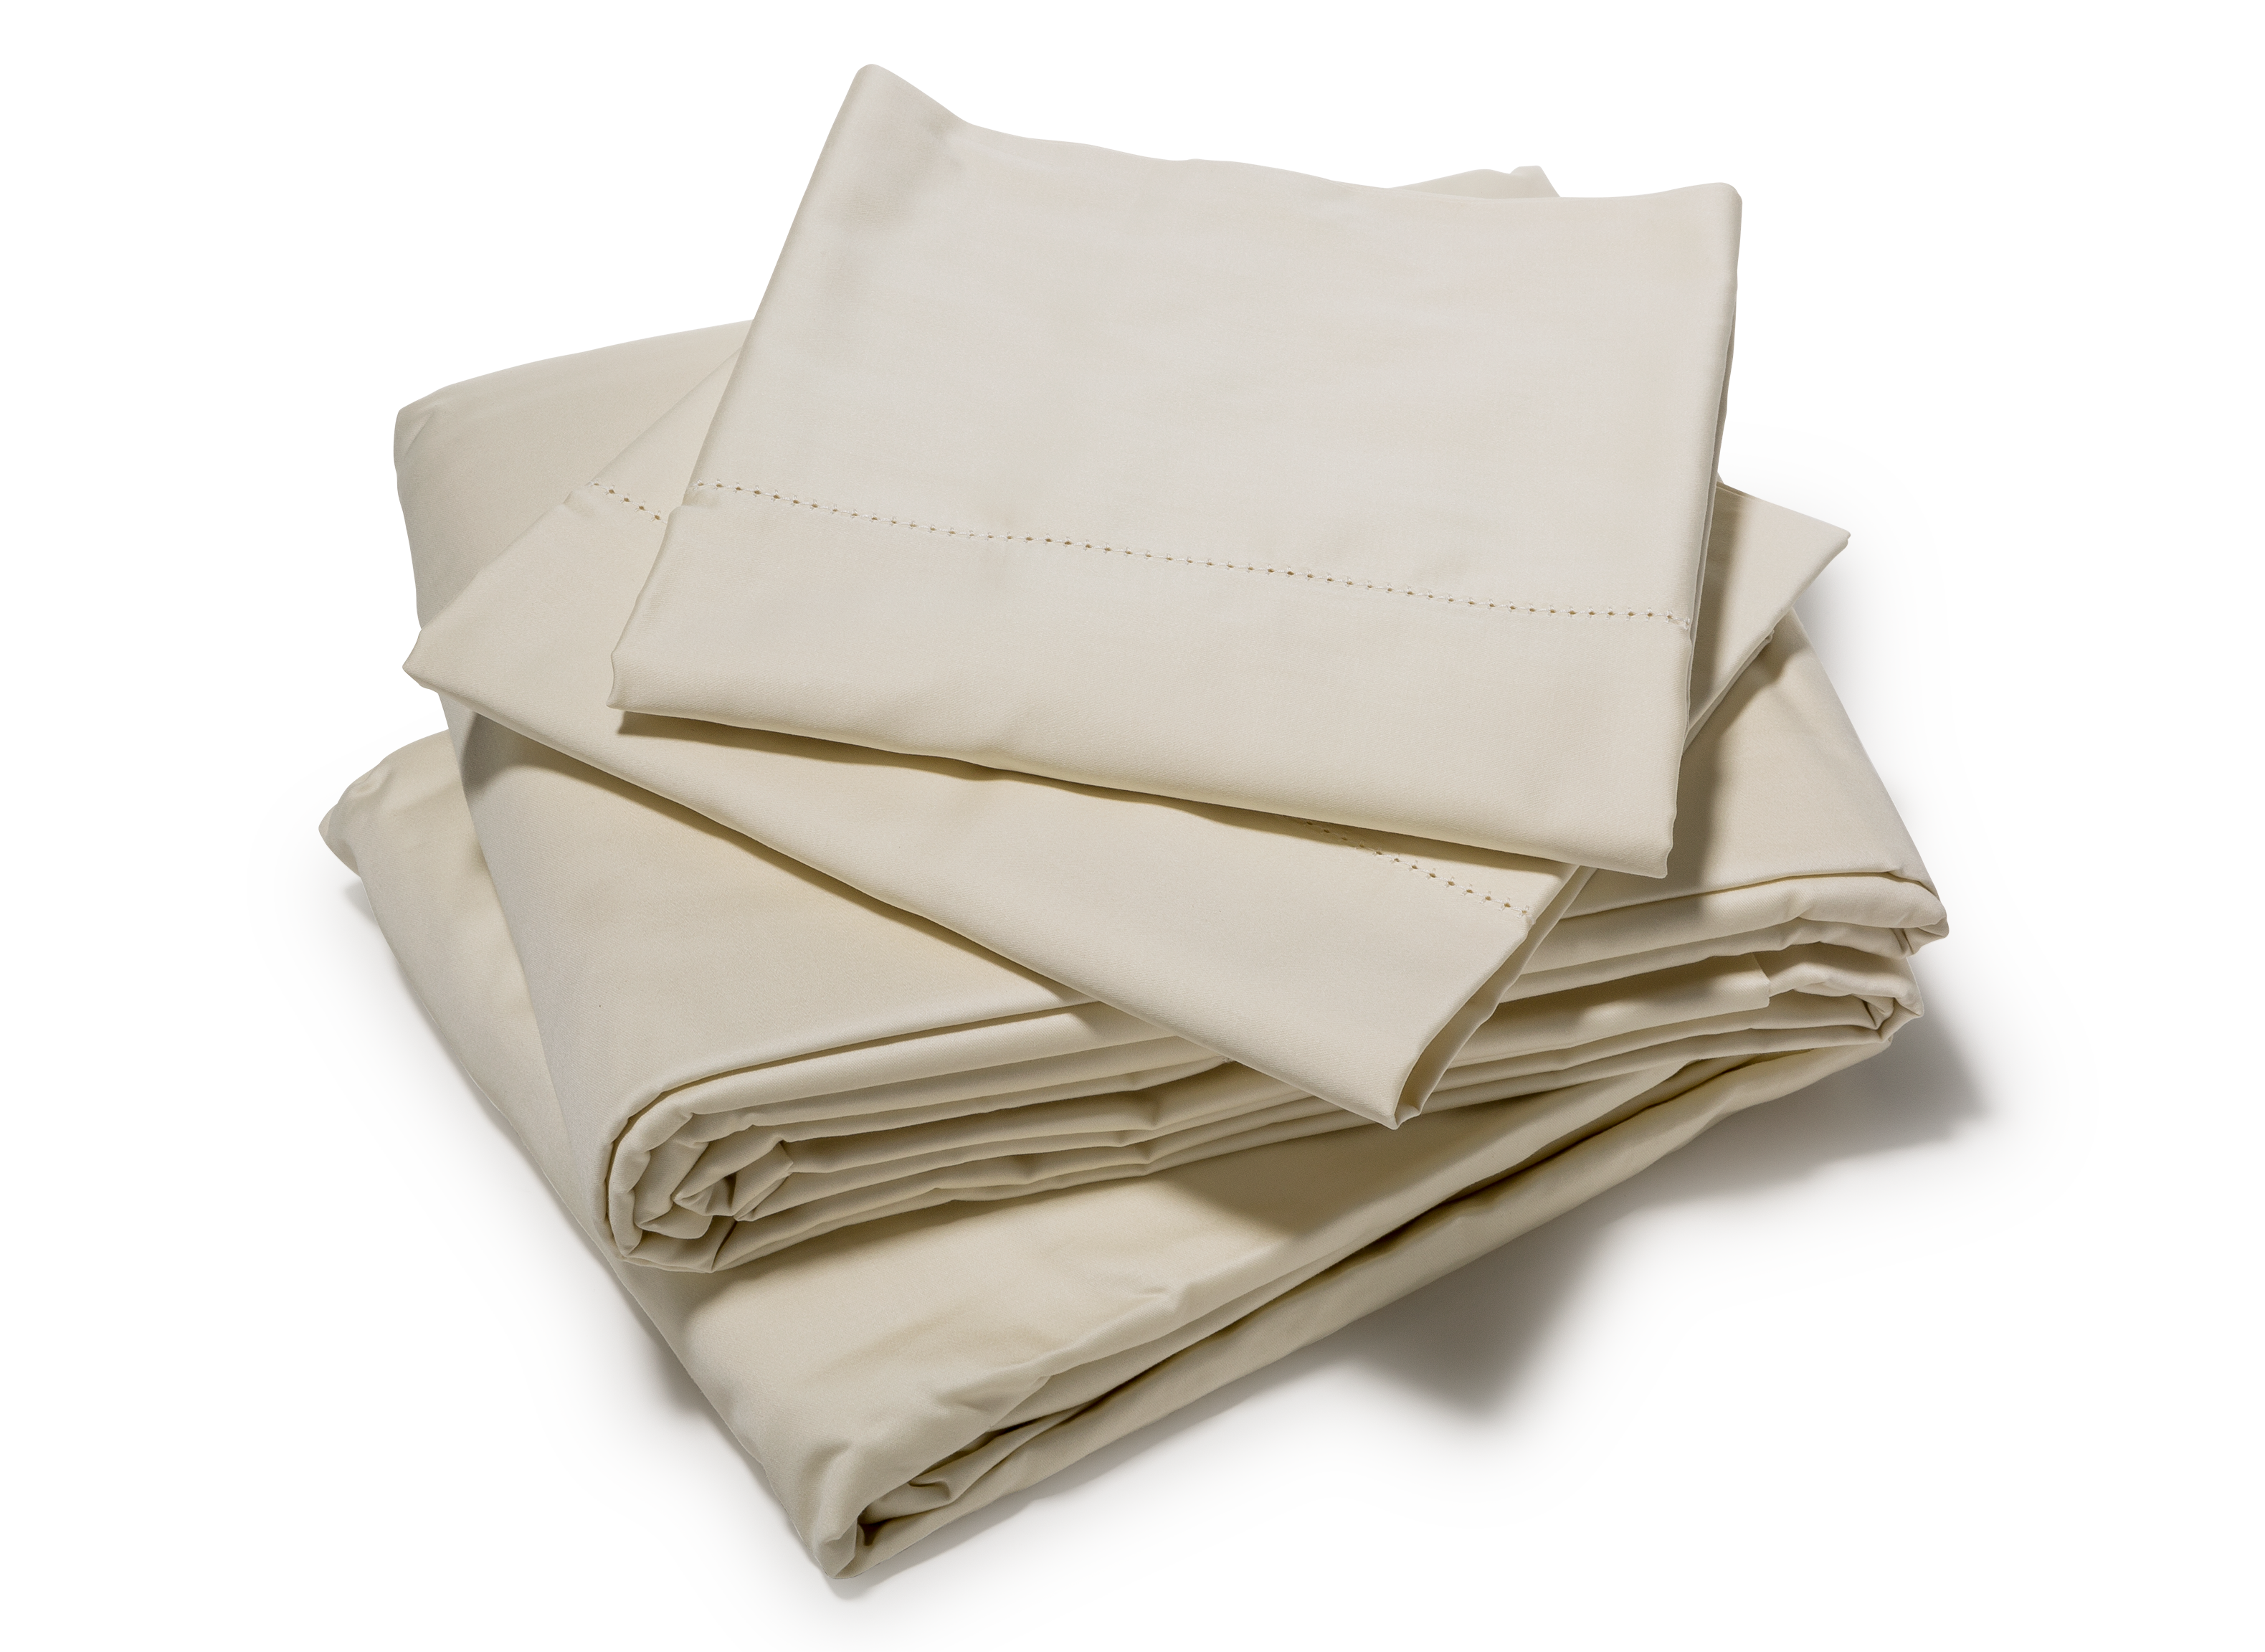 https://crdms.images.consumerreports.org/prod/products/cr/models/396406-sheets-pinzon-by-amazon-pinzon-400-tc-egyptian-cotton-sateen-10002489.png